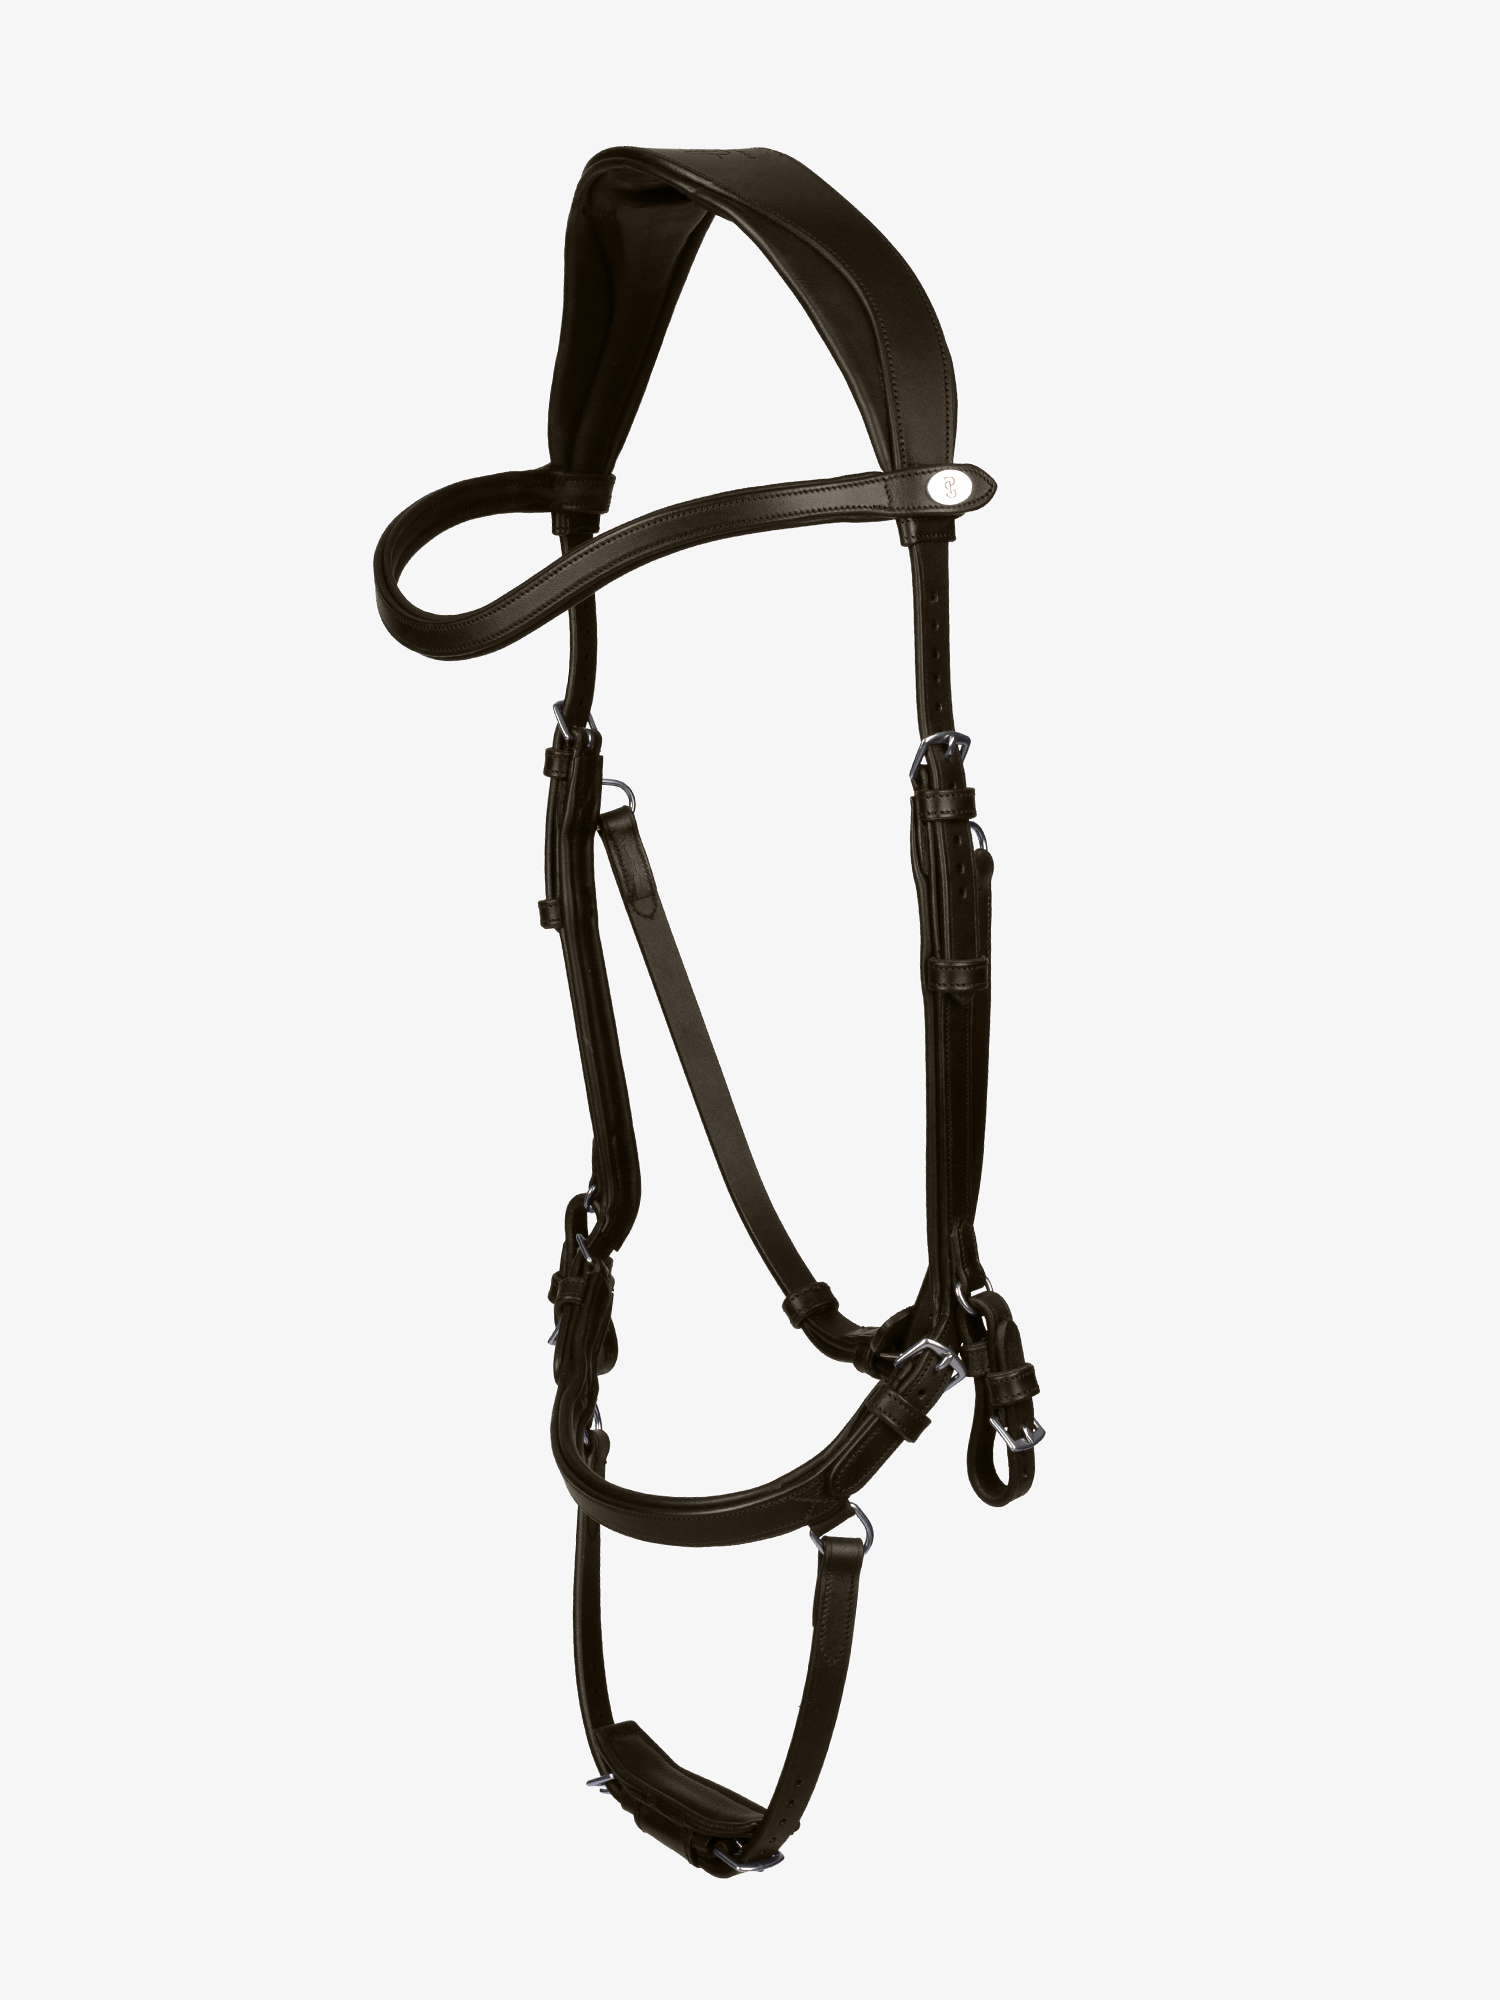 The King Edward Brown bridle is a creation developed in